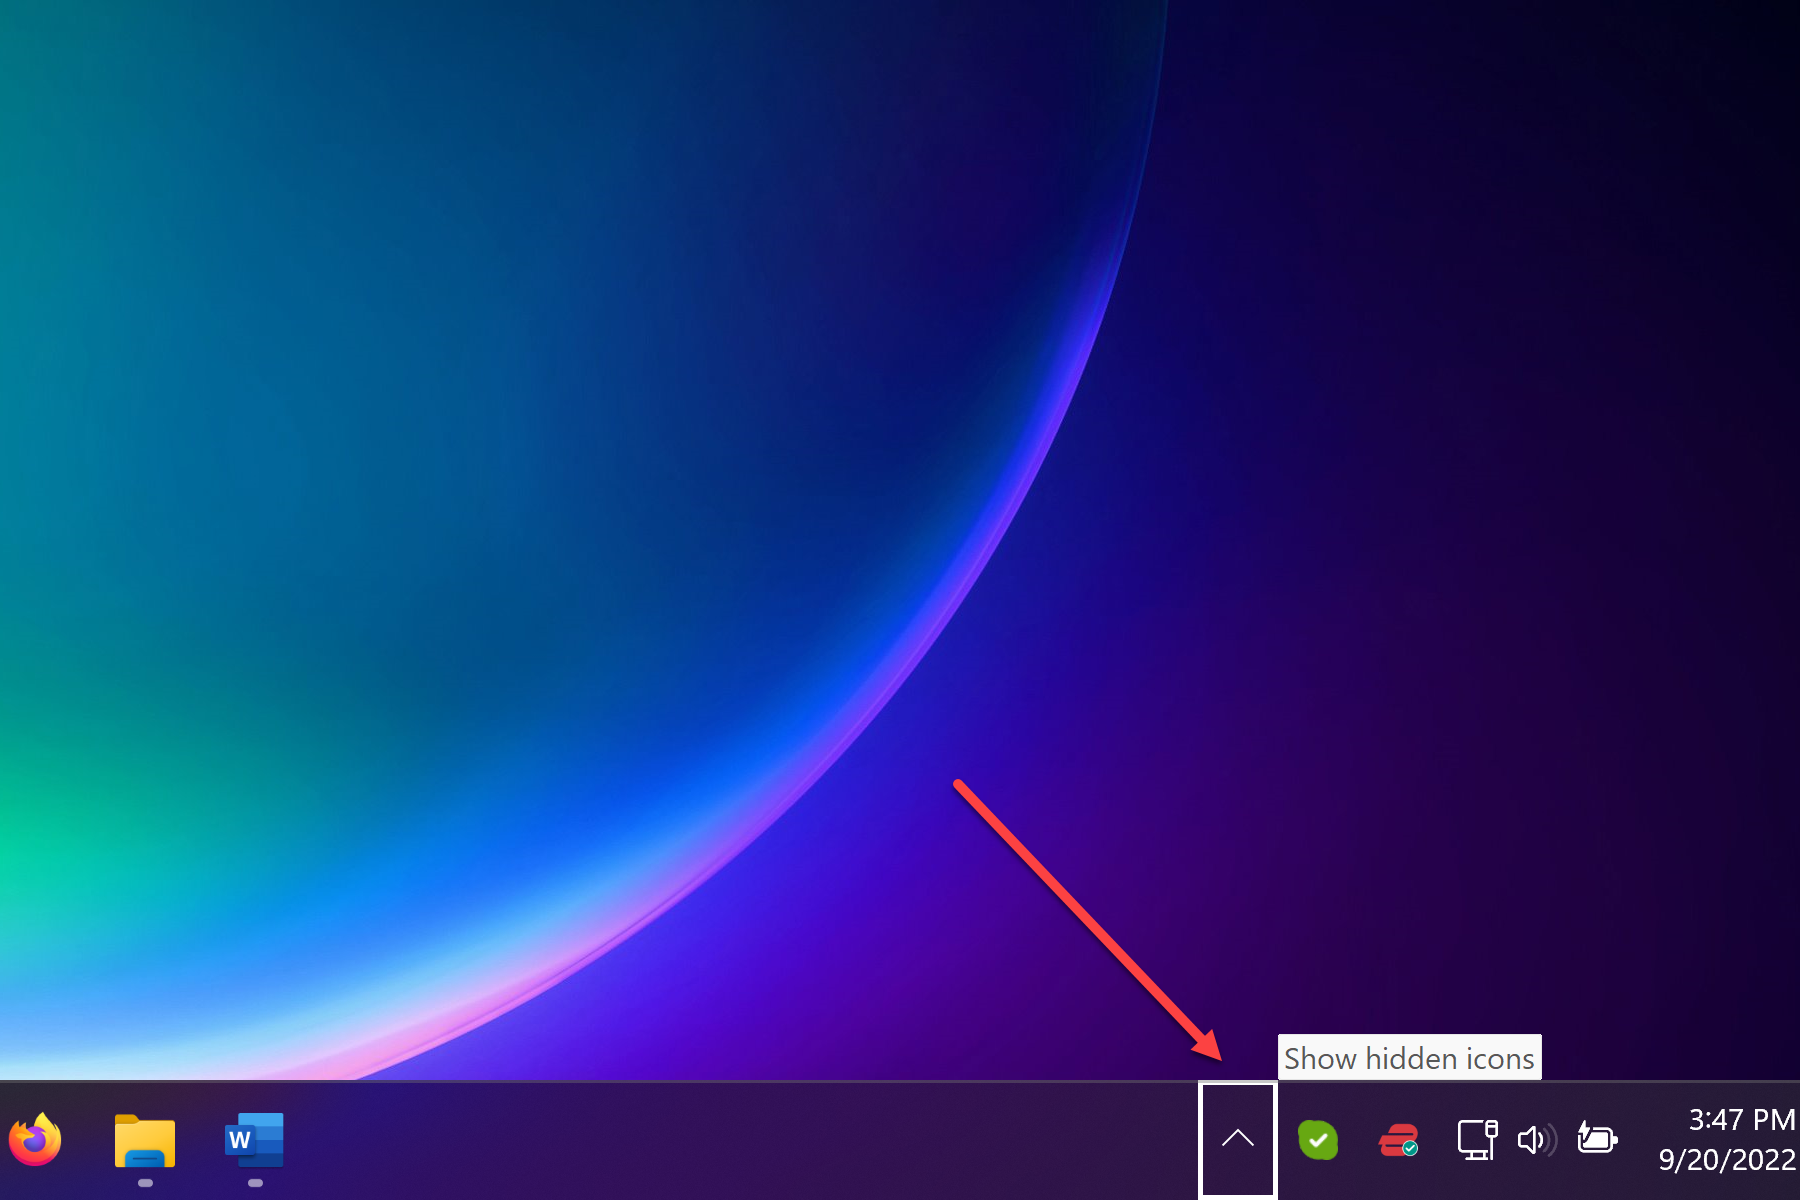 The Show hidden icons button in Windows 11